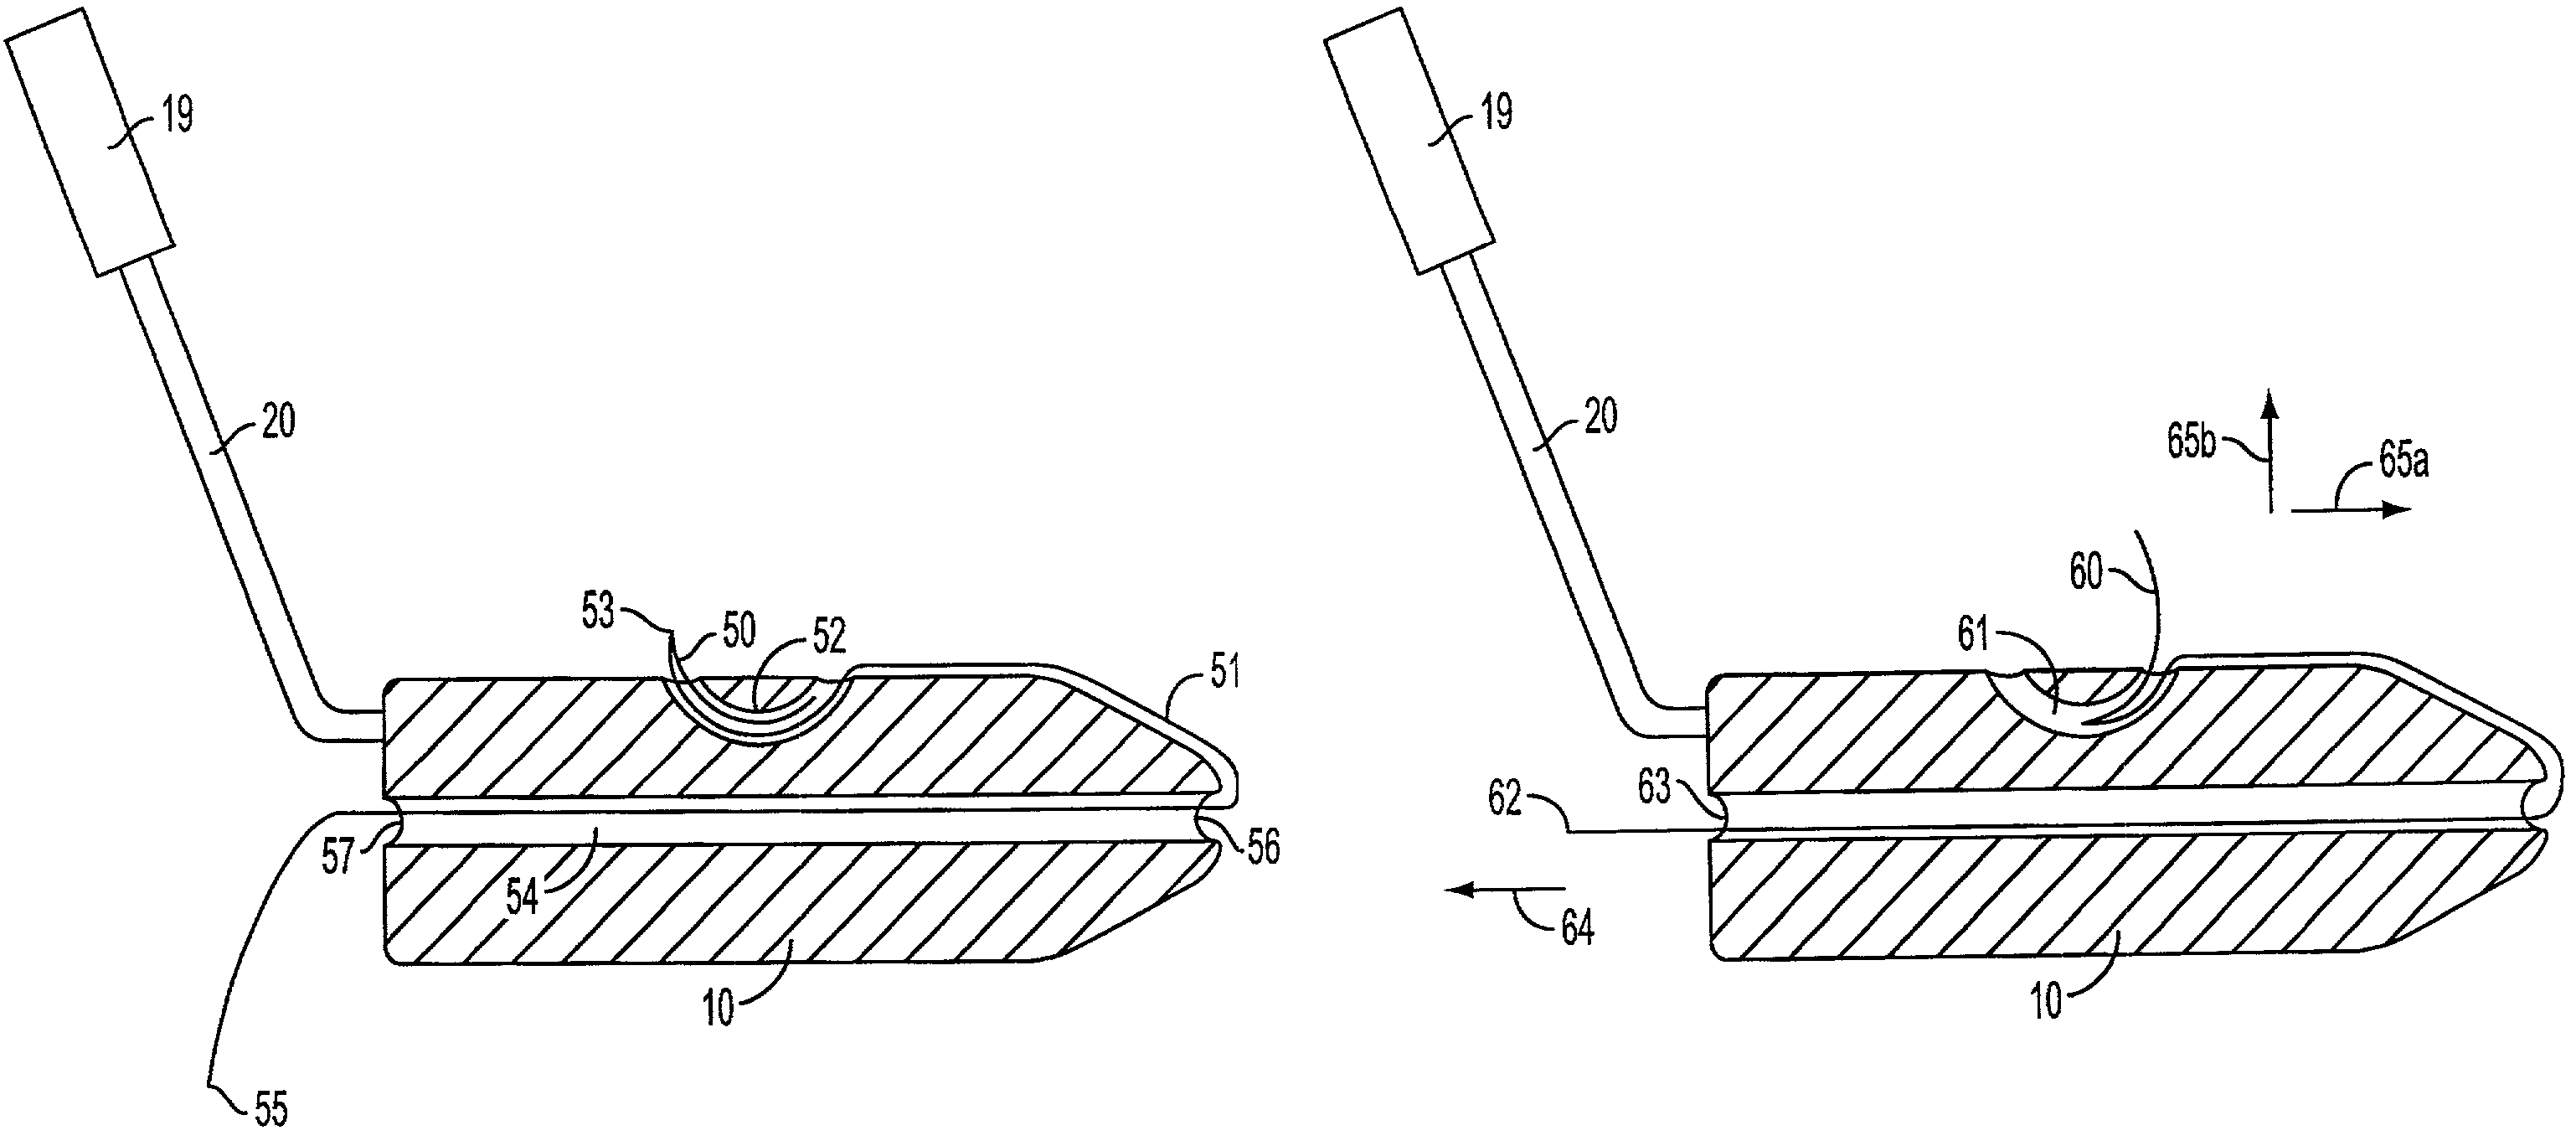 Devices and methods for positioning sutures